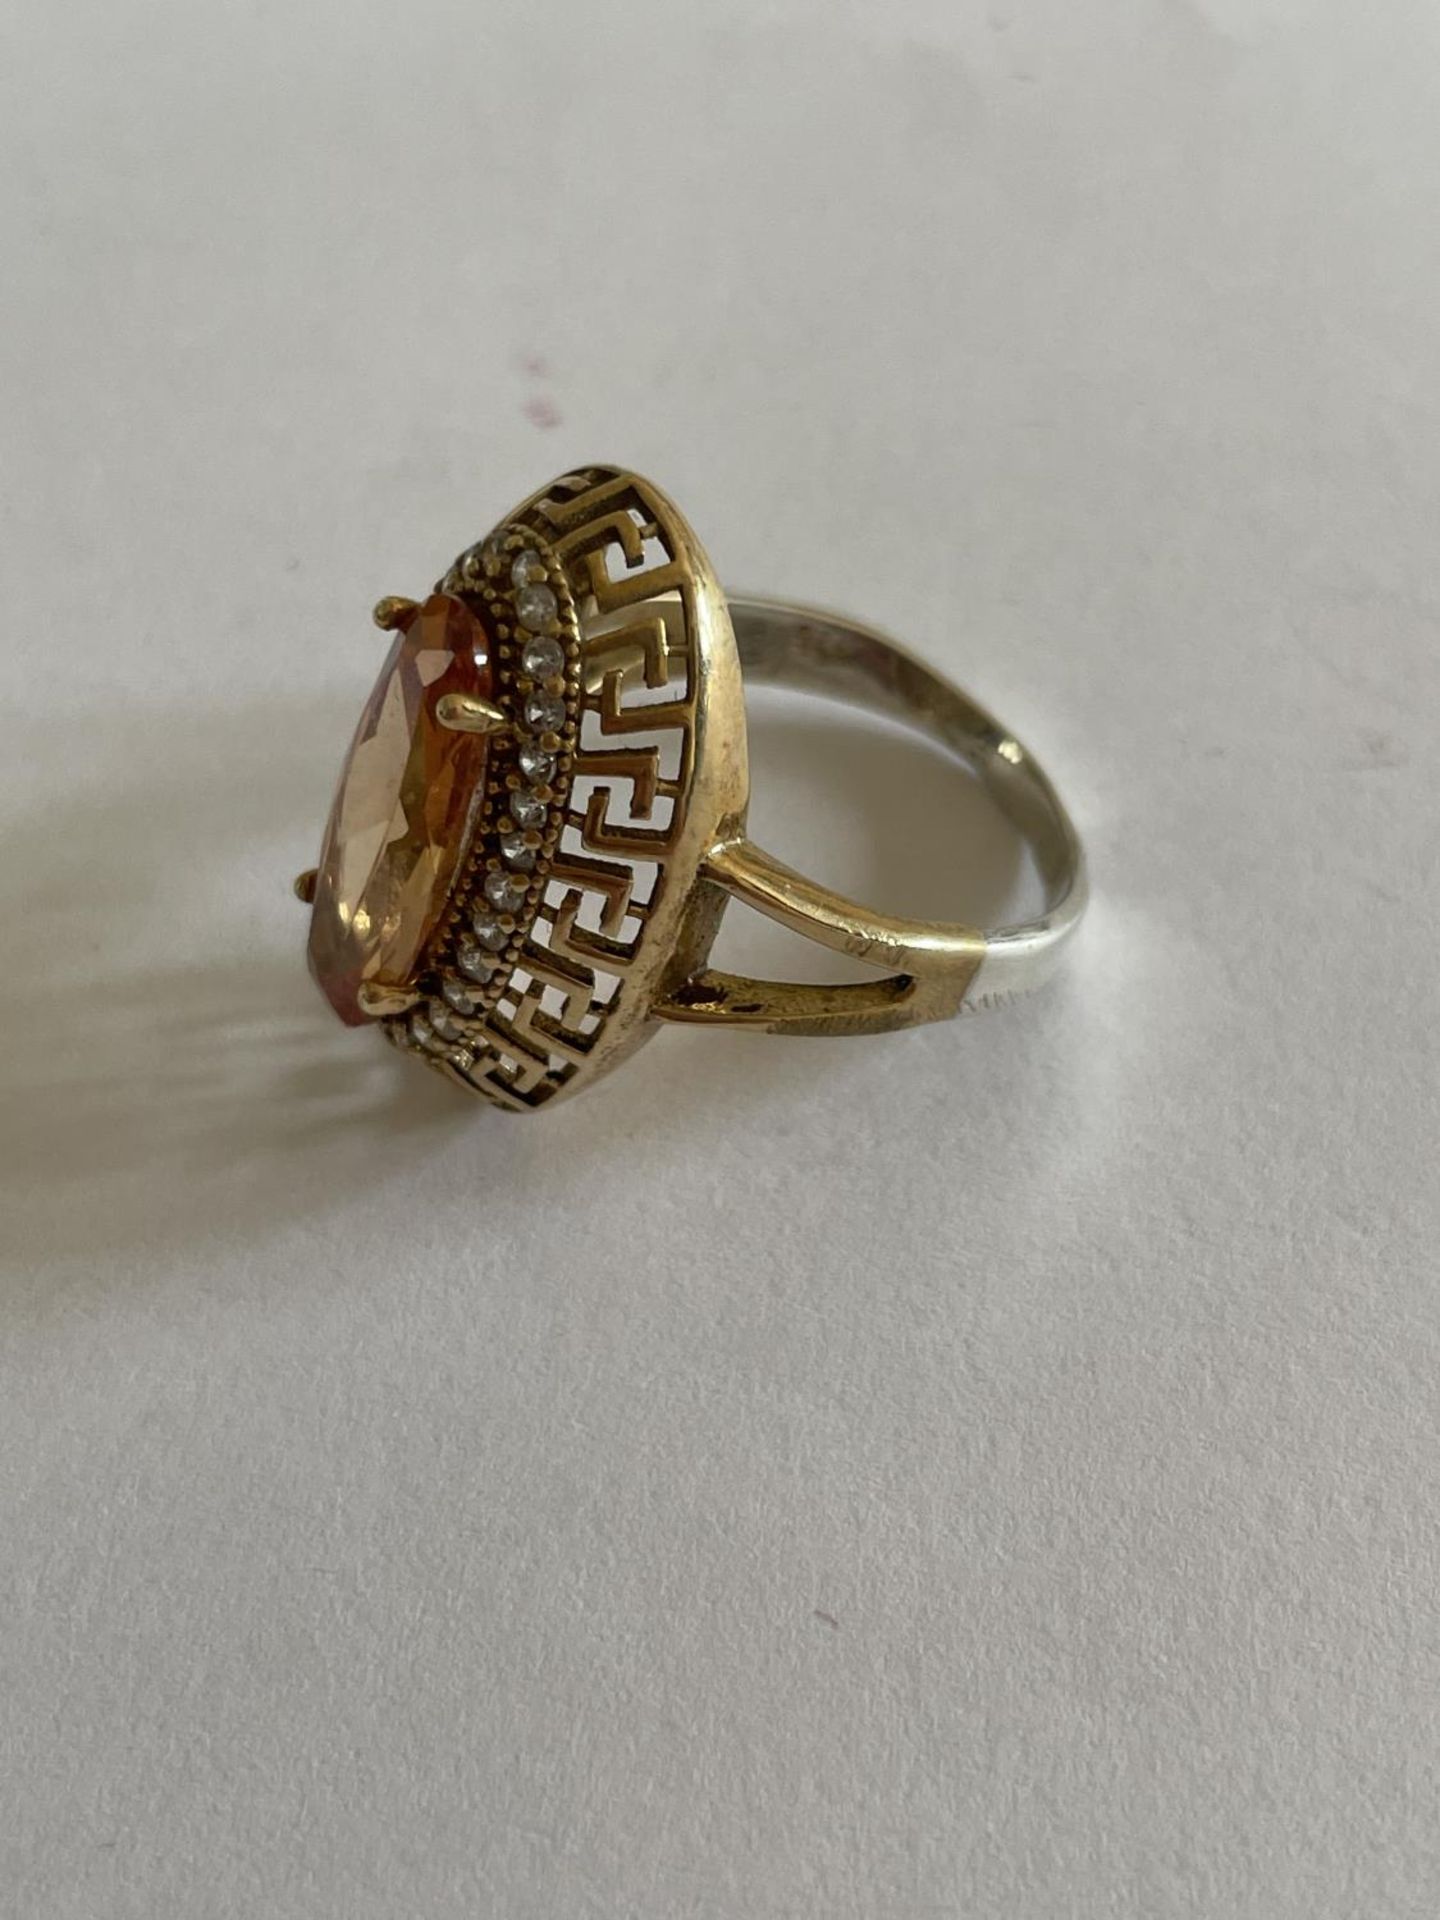 A DECORATIVE SILVER AND GOLD RING WITH LARGE AMBER COLOURED STONE SURROUNDED BY CLEAR STONES SIZE - Image 2 of 3